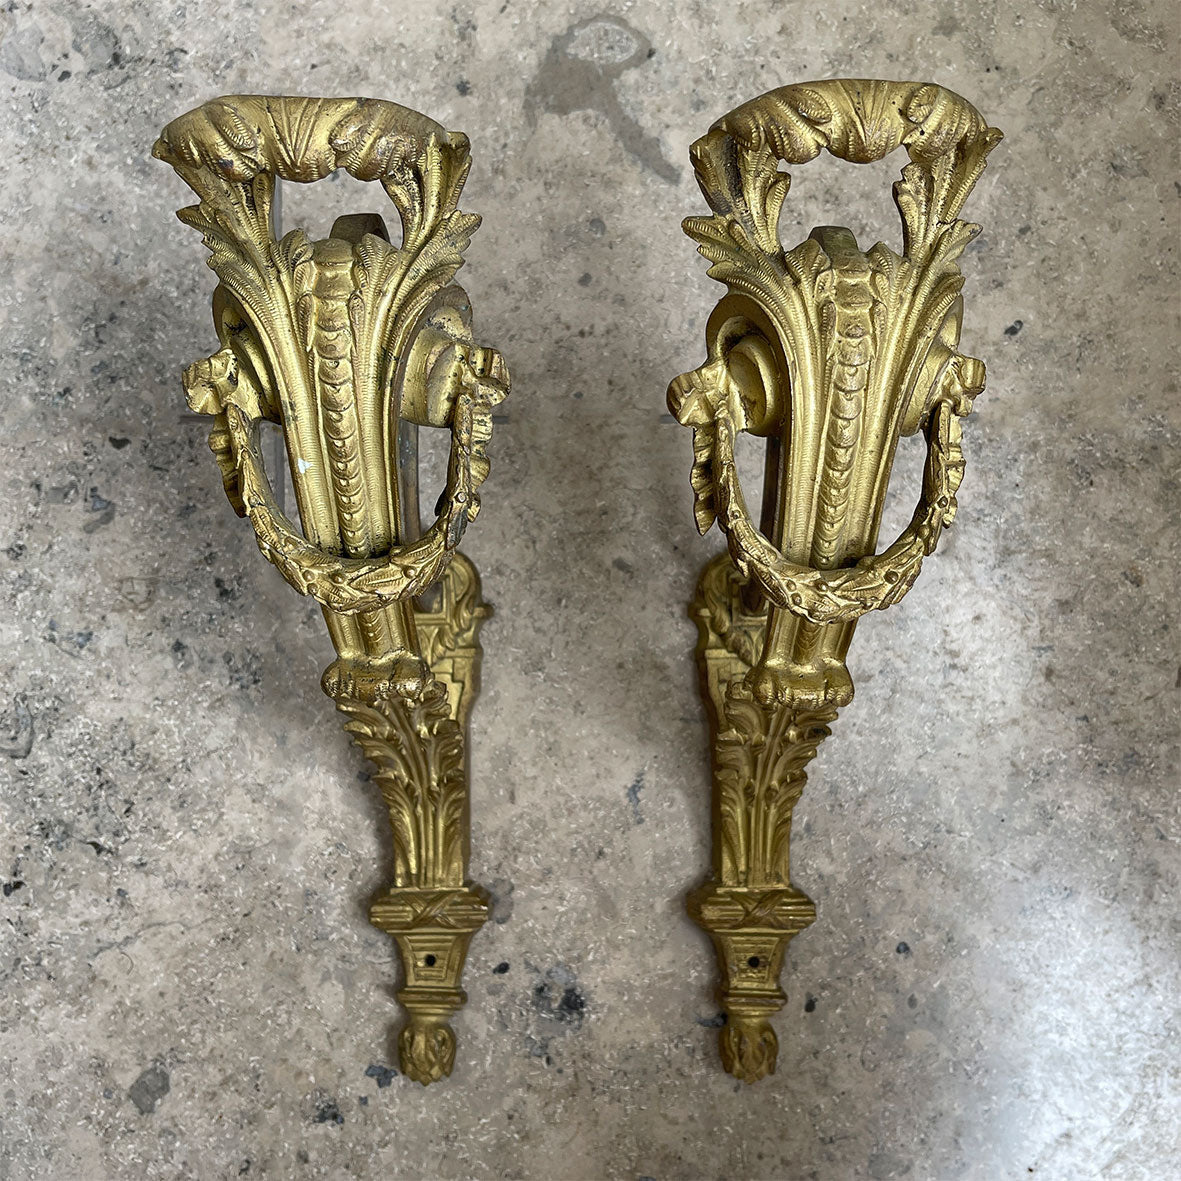 A pair of large antique french gilded 'ormolu' curtain rod brackets in the Louis XVI style - SHOP NOW - www.intovintage.co.uk